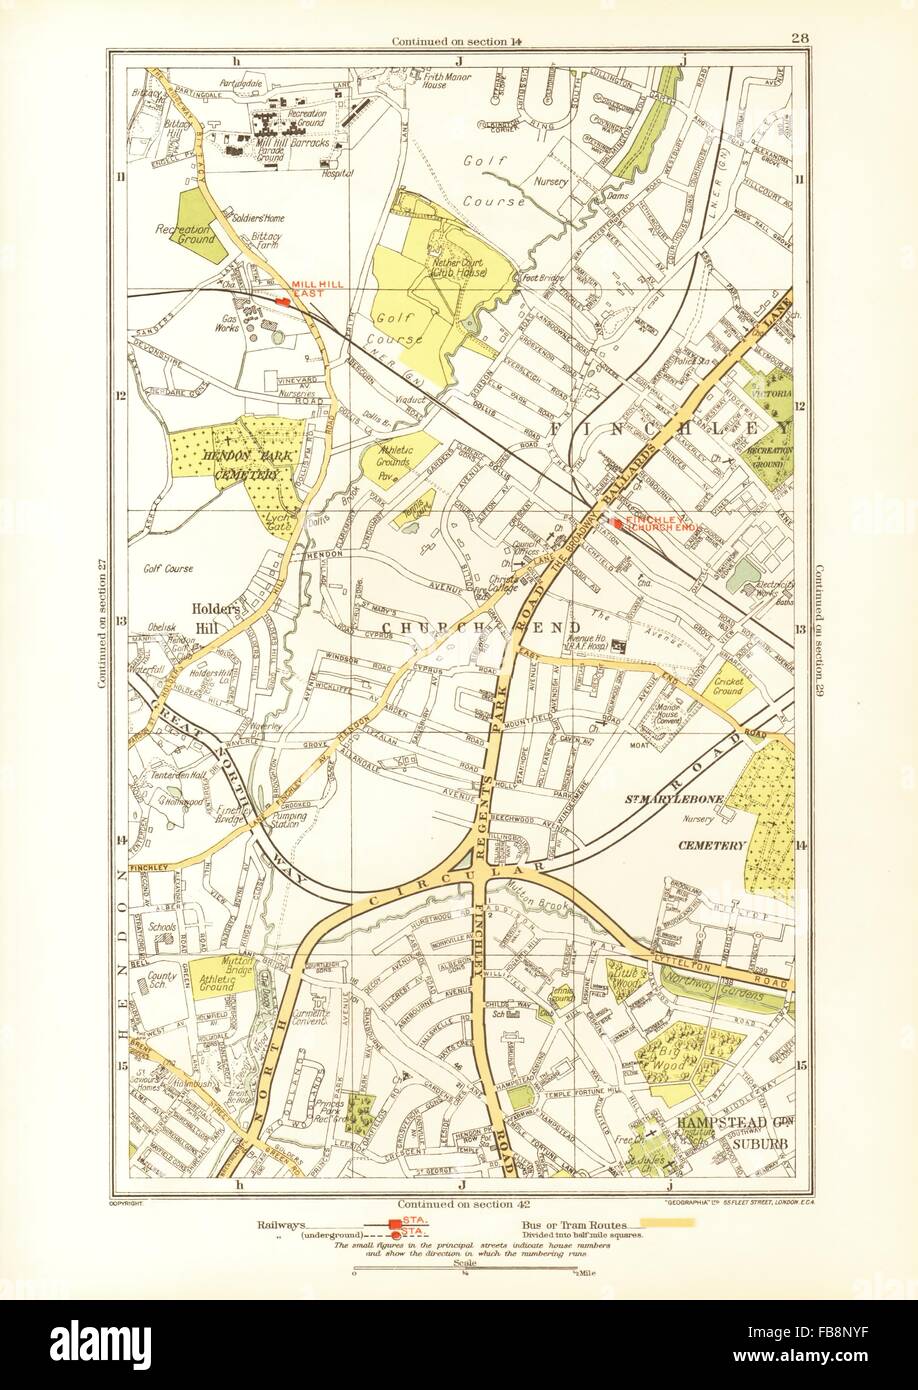 FINCHLEY. Church End, Hampstead Garden Suburb, Mill Hill, Hendon, 1933 old map Stock Photo